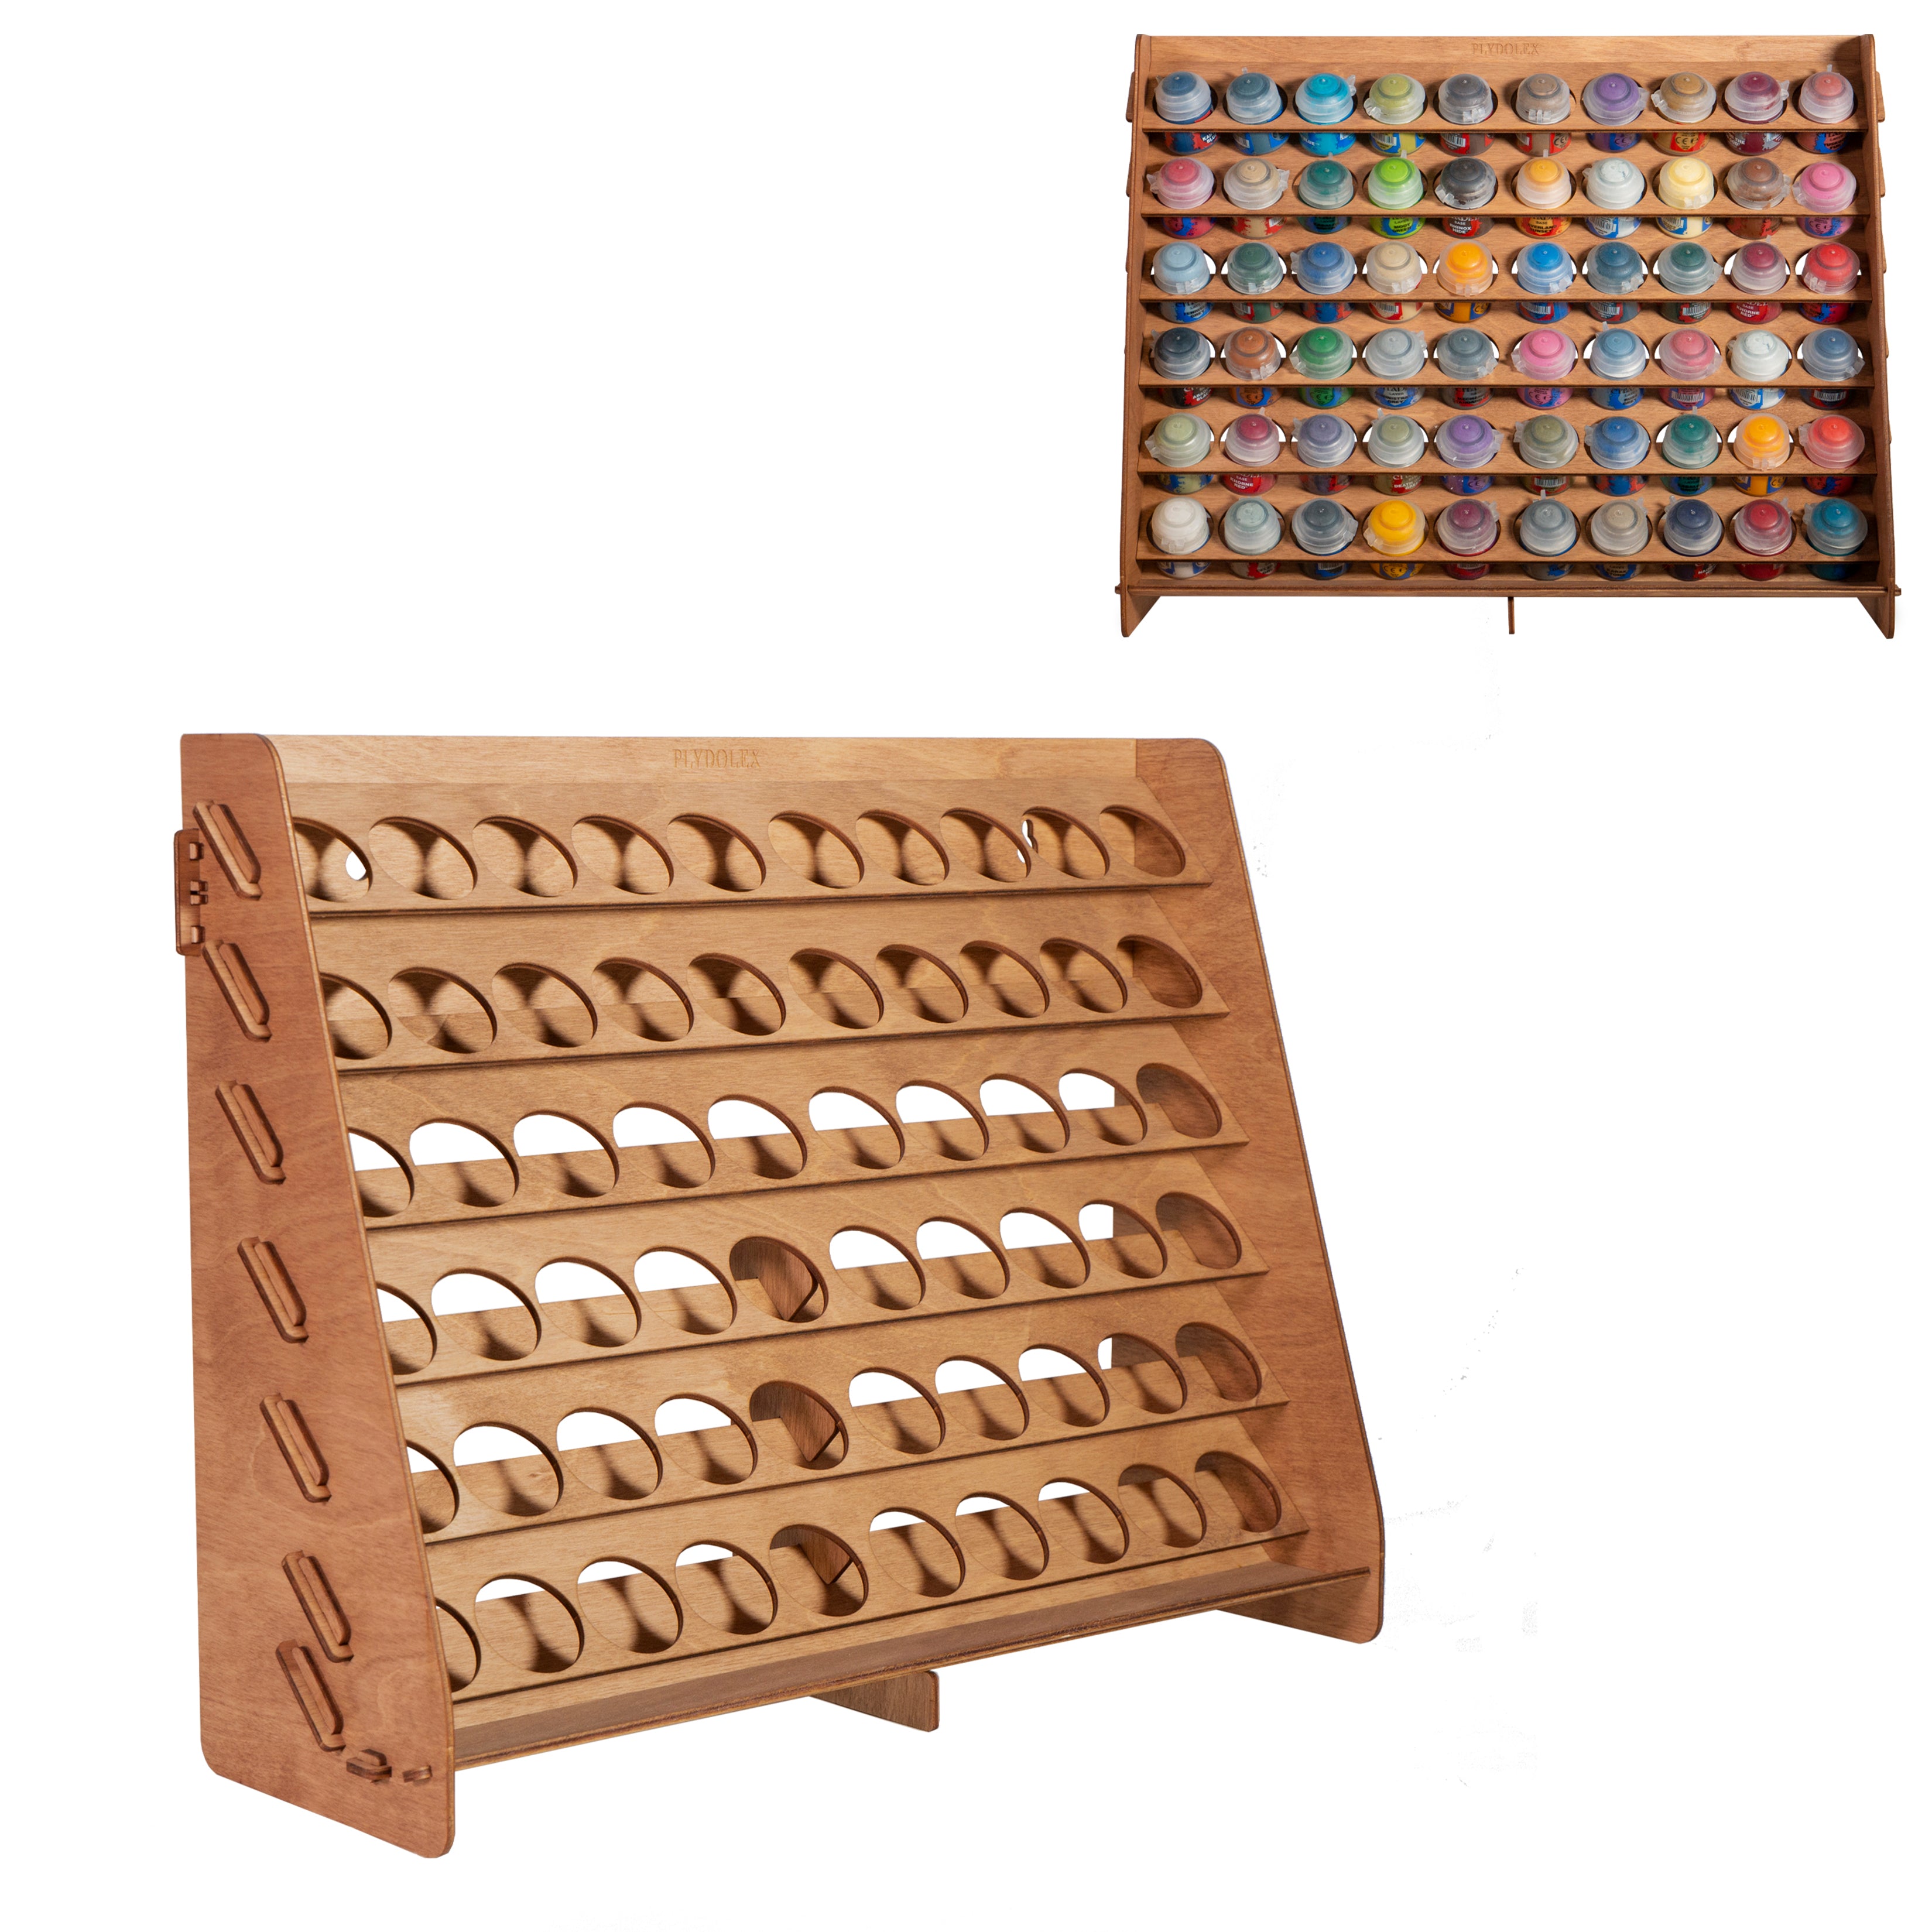 PLYDOLEX Citadel Paint Rack Organizer with 60 Holes for Miniature Pain –  Plywood Organizers for Miniature Painters - Wooden HandCraft Gift and  Accessories by Plydolex